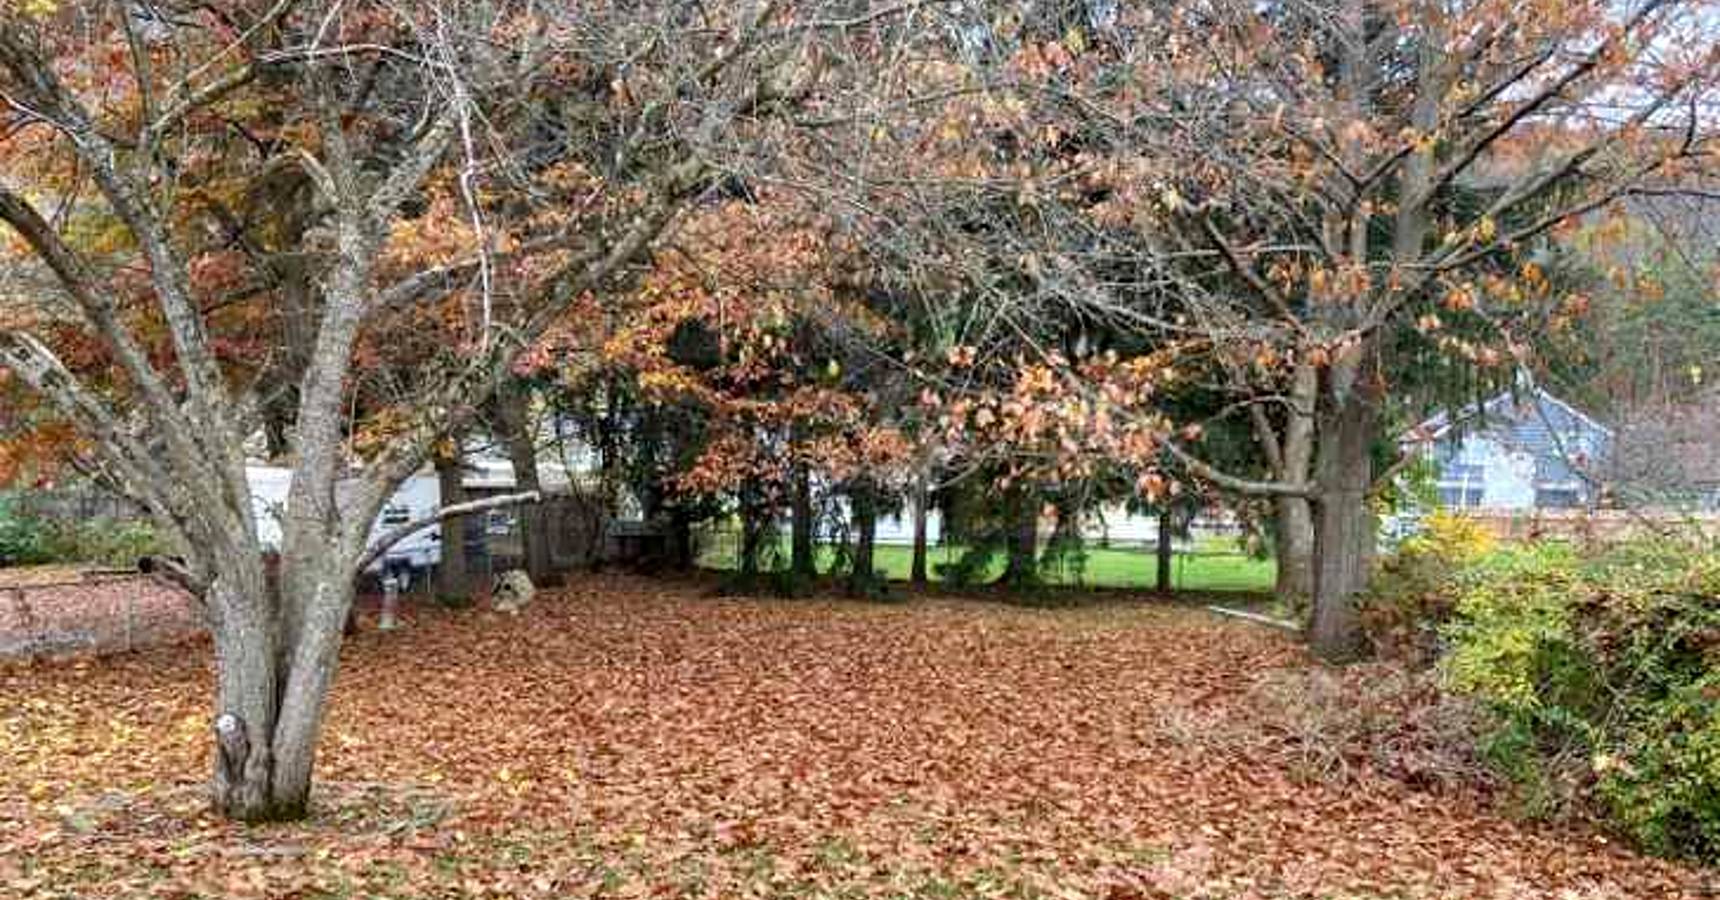 Optical illusion can you find the dog in between tree and leaves within 7 seconds